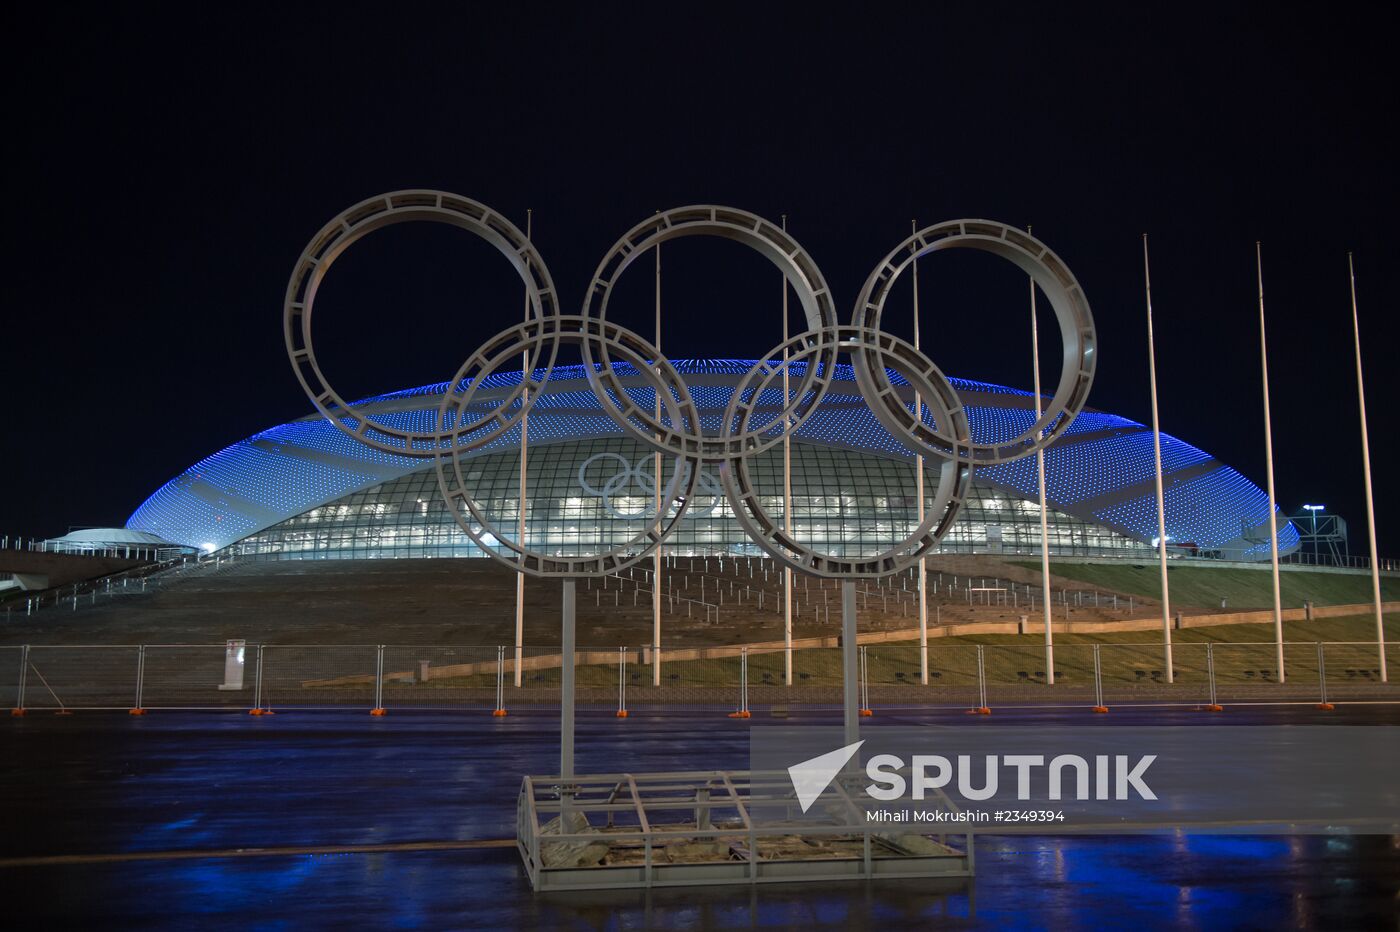 Facilities of the coastal cluster for the 2014 Winter Olympics